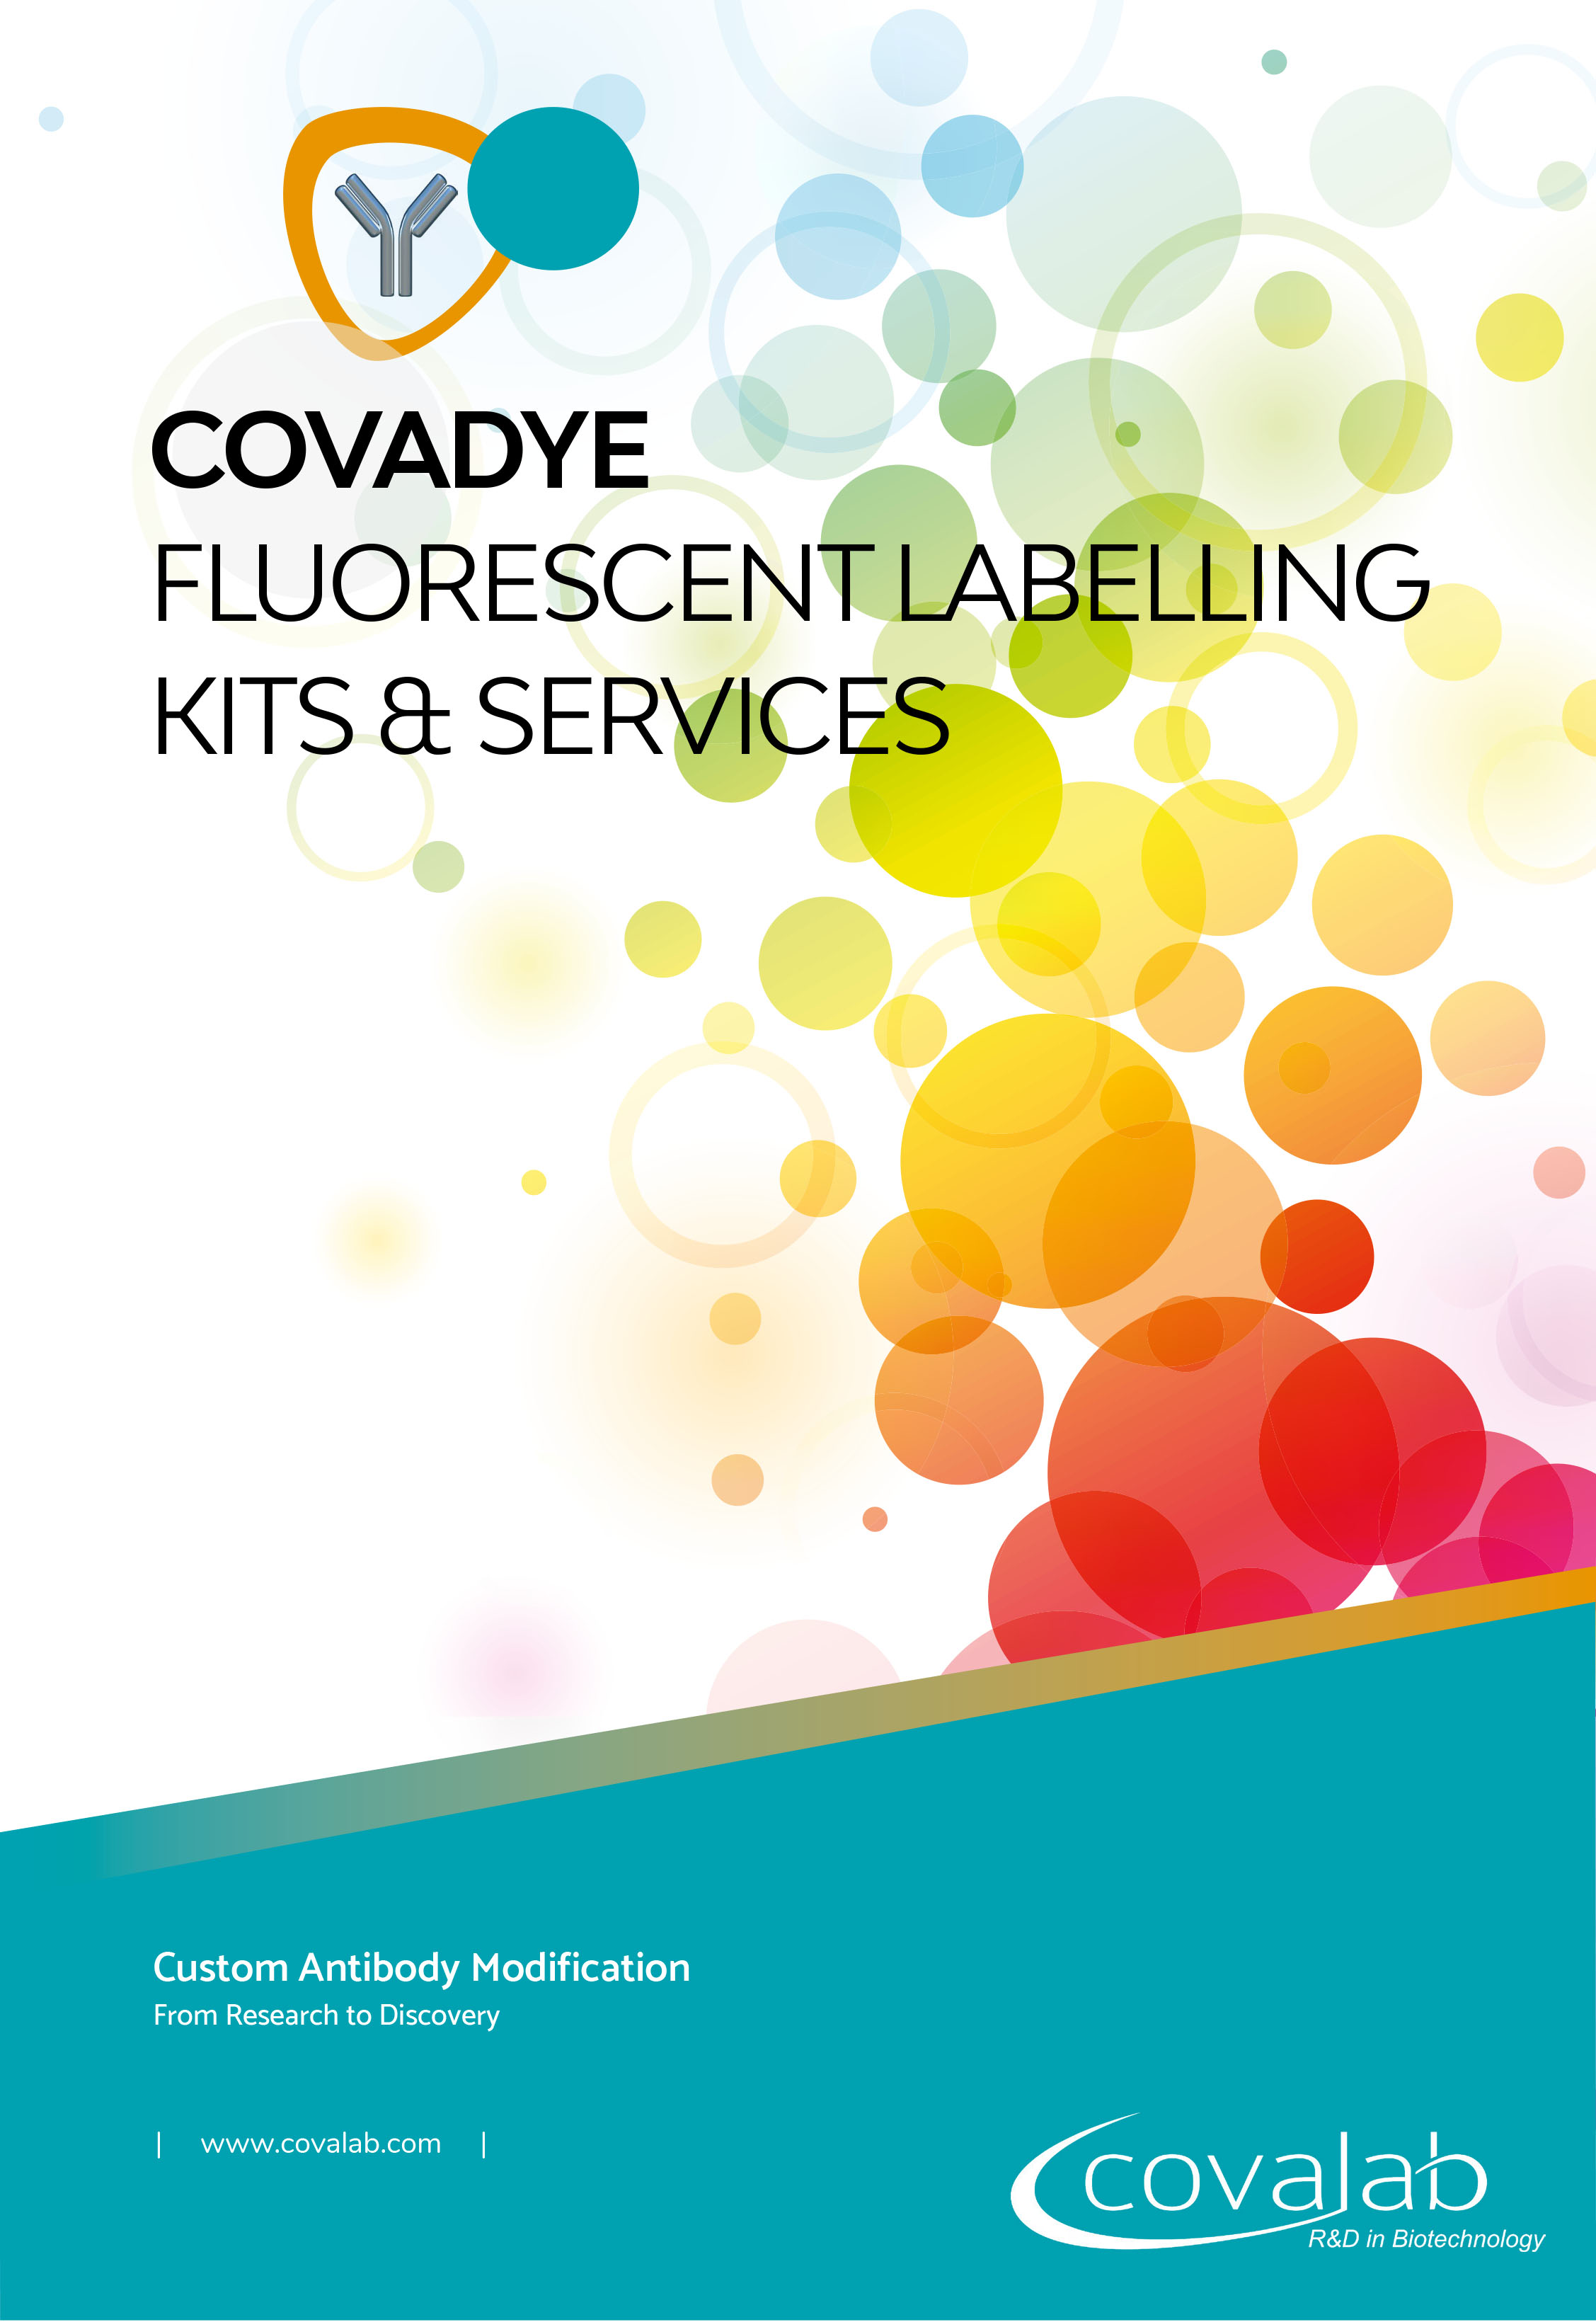 CovaDye fluorescent labelling kits & services from Covalab